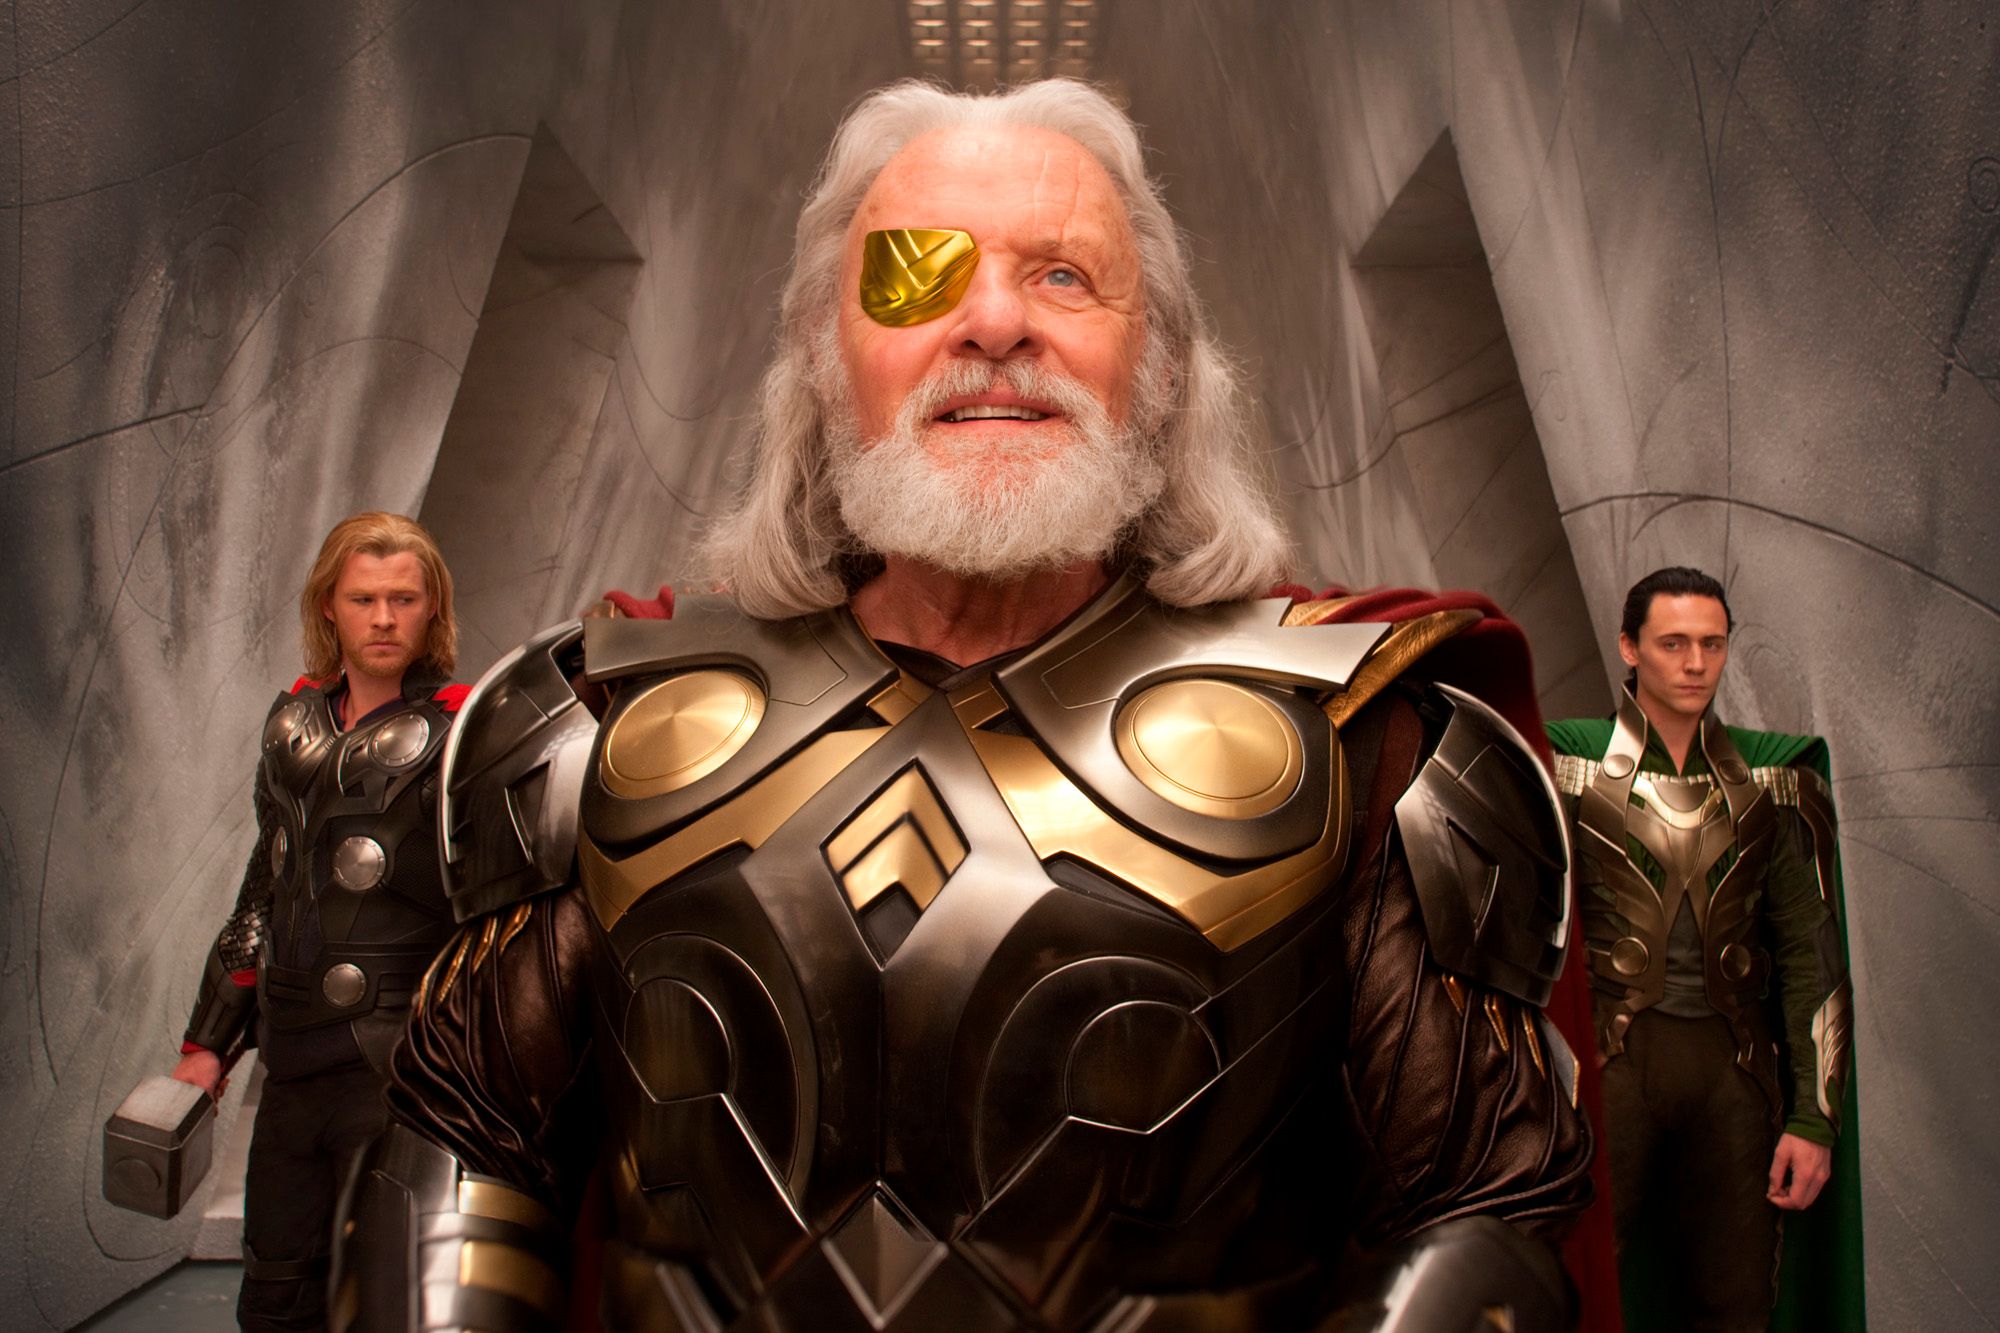 Was Mel Gibson Supposed to Be Odin?